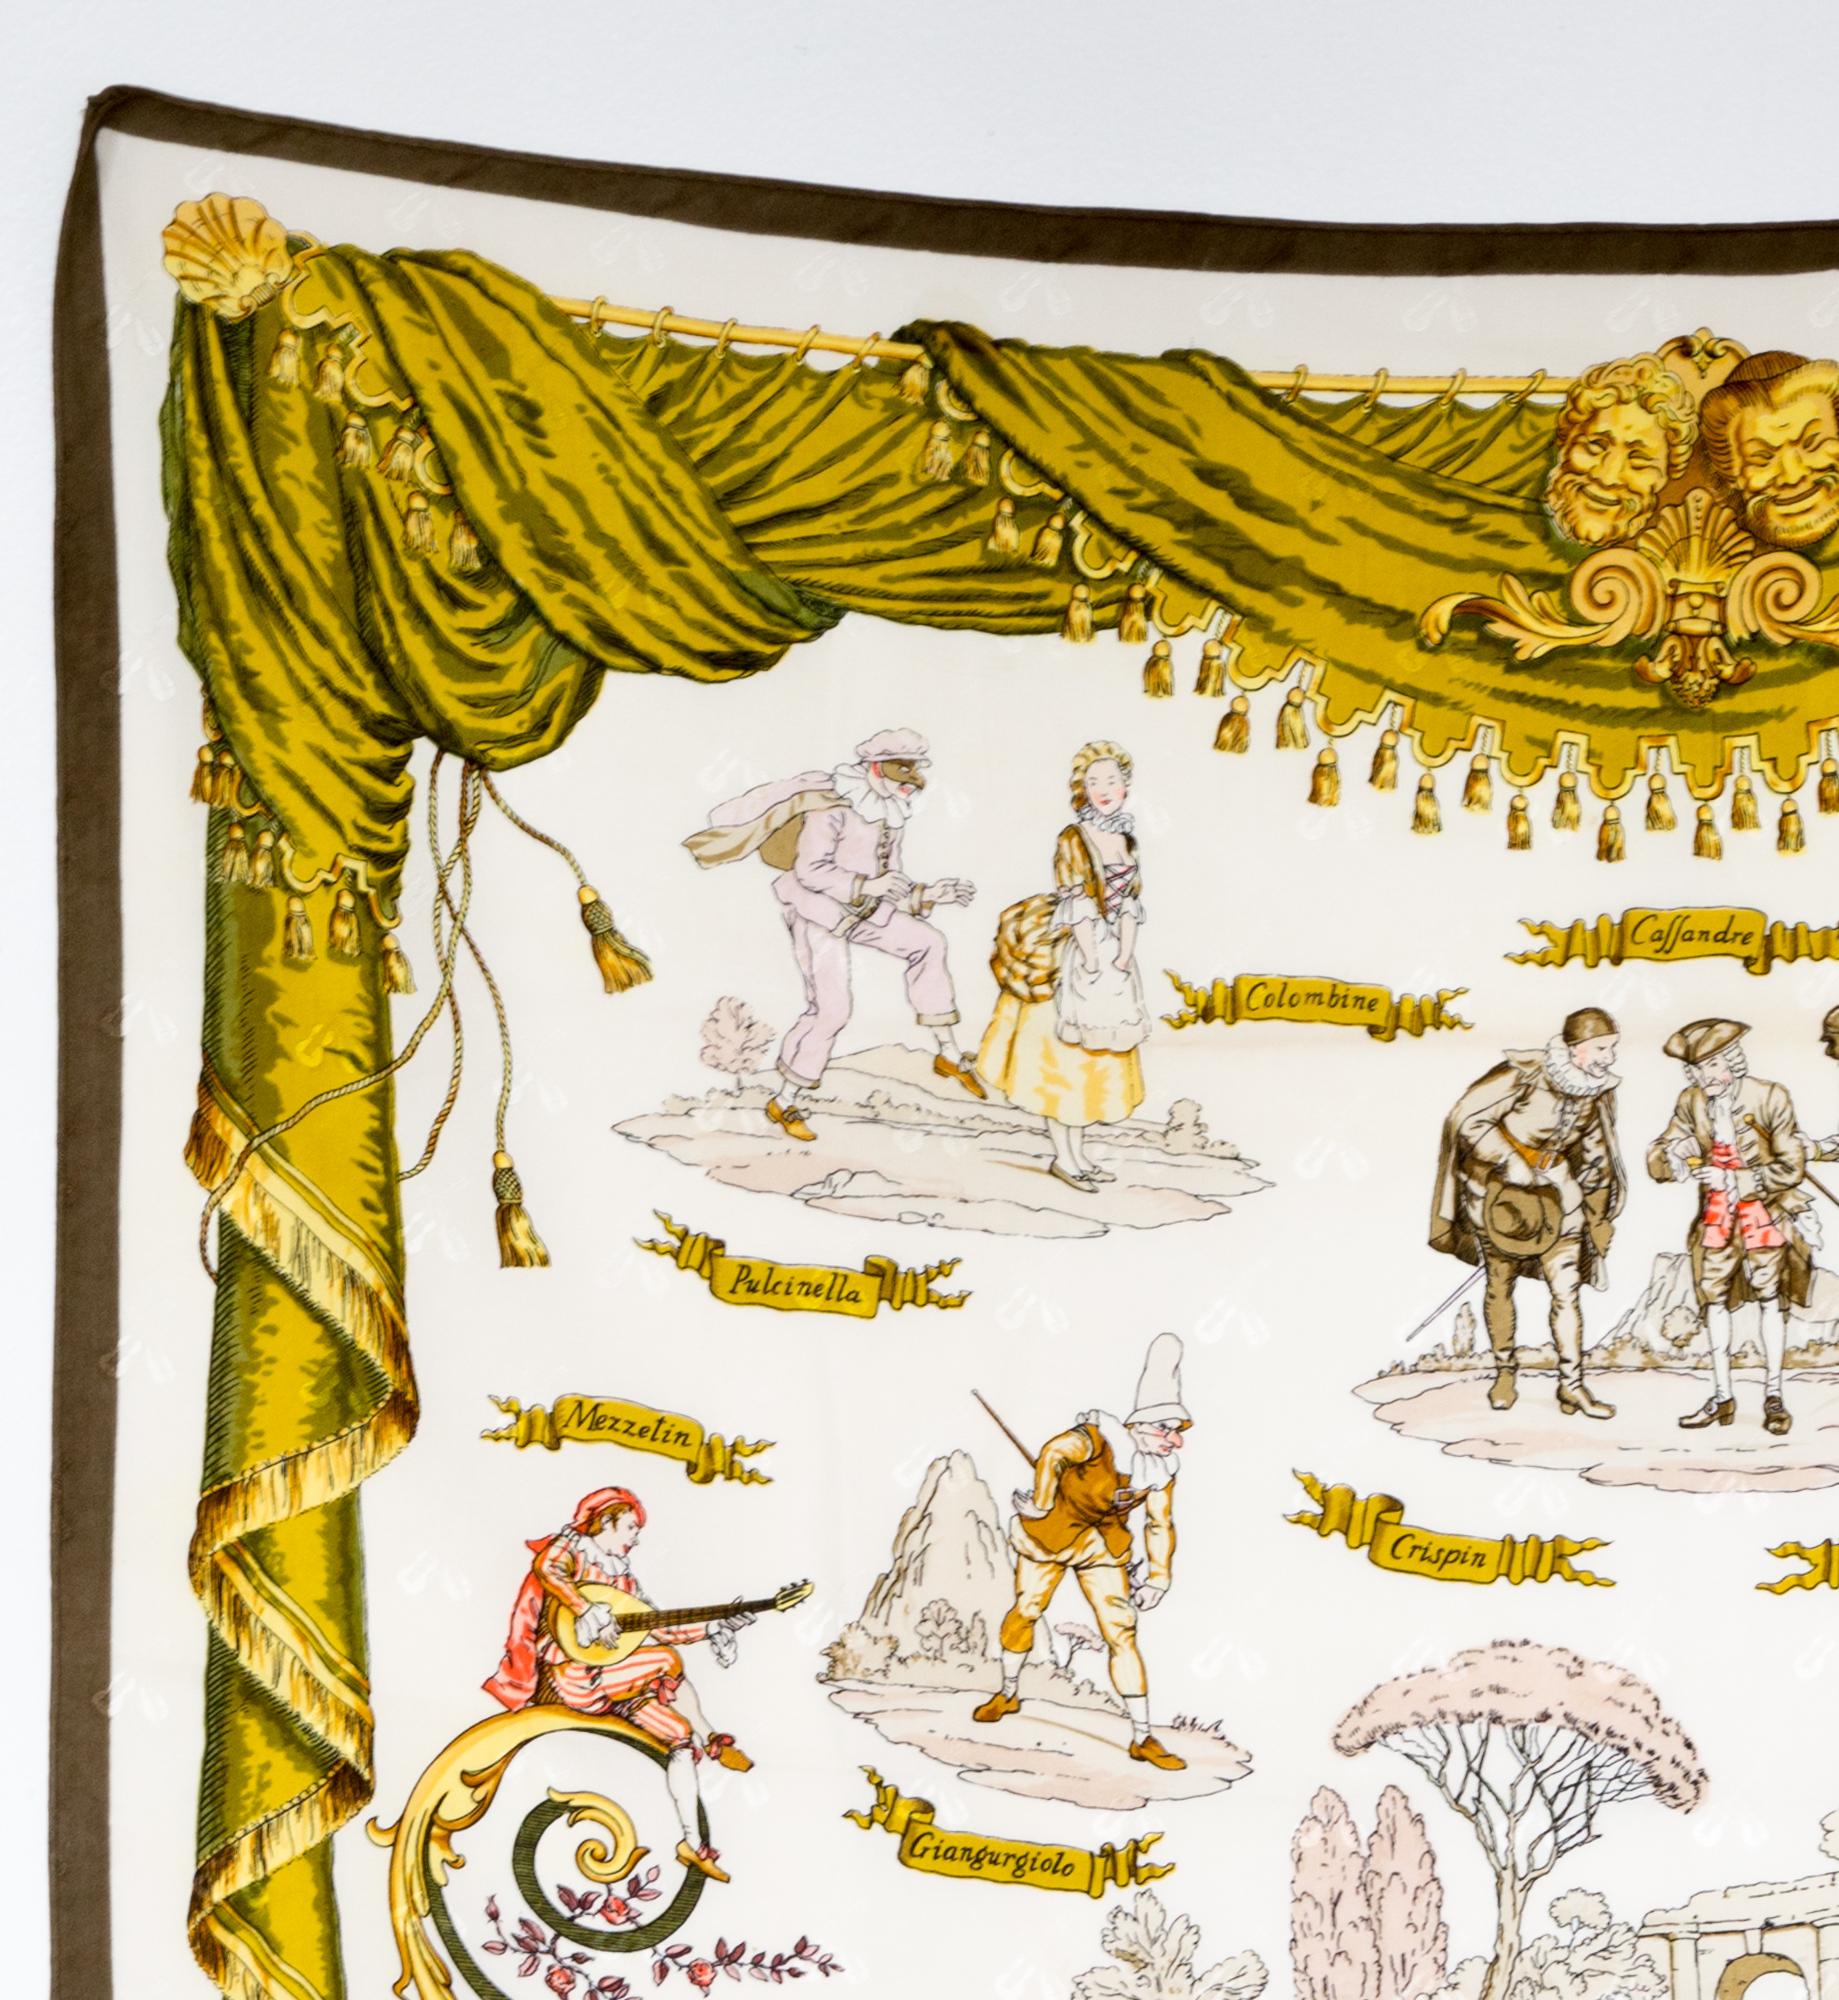 Hermes silk twill scarf titled La Comédie Italienne designed by Philippe Ledoux in 1962, predominantly beige and ochre, featuring a jacquard ground with music instruments, a dark kaki border and a Hermès signature. 
In good vintage condition. Made